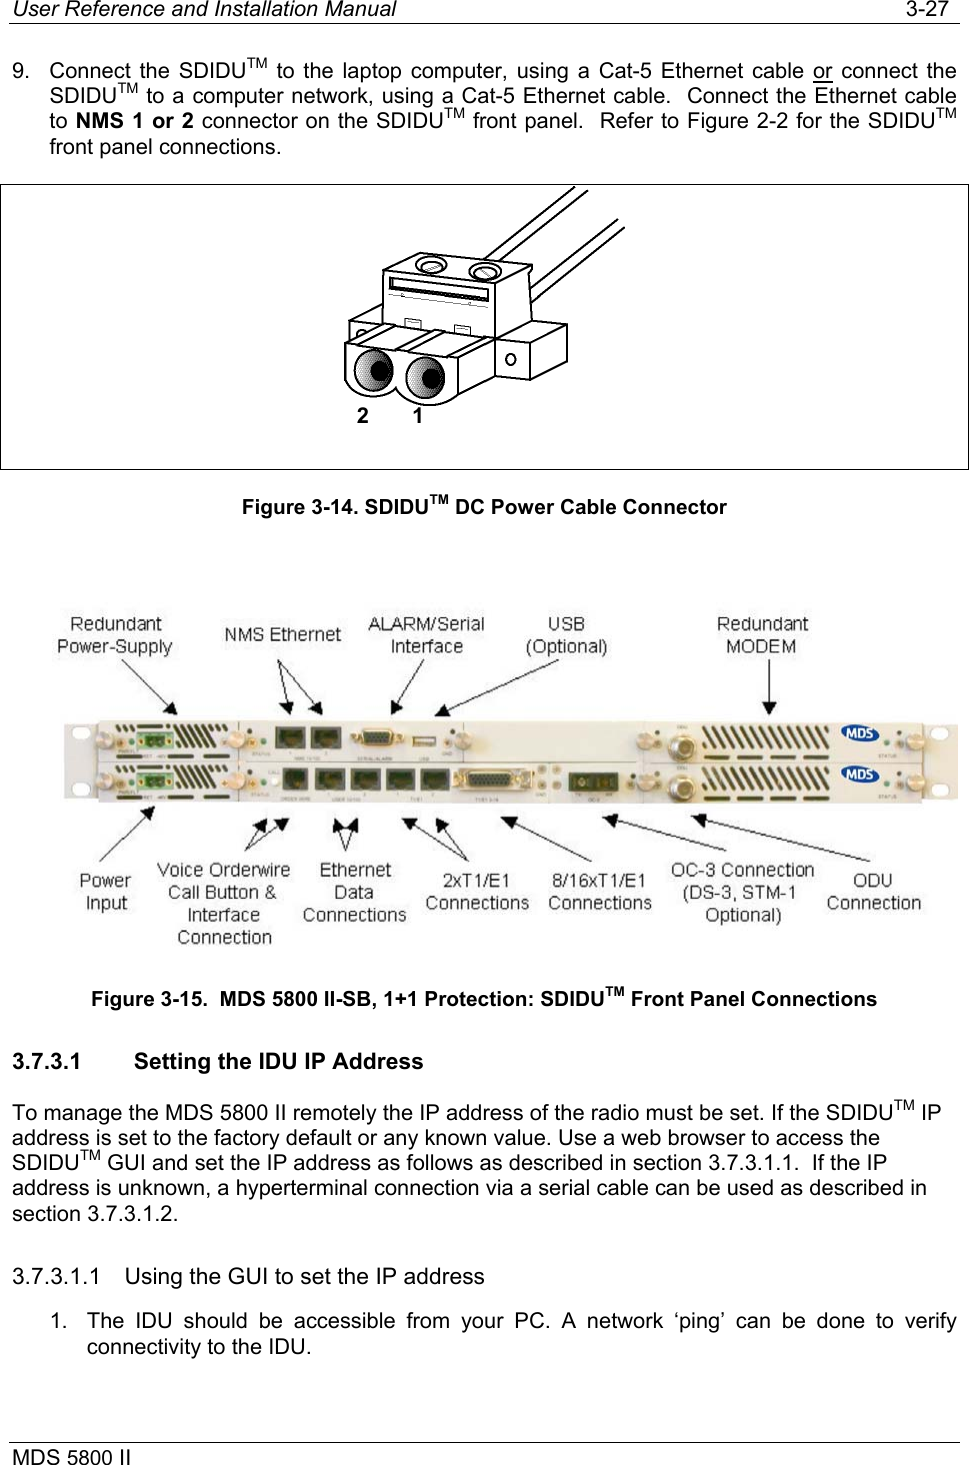 User Reference and Installation Manual   3-27 MDS 5800 II      9.  Connect the SDIDUTM to the laptop computer, using a Cat-5 Ethernet cable or connect the SDIDUTM to a computer network, using a Cat-5 Ethernet cable.  Connect the Ethernet cable to NMS 1 or 2 connector on the SDIDUTM front panel.  Refer to Figure 2-2 for the SDIDUTM front panel connections.   Figure 3-14. SDIDUTM DC Power Cable Connector   Figure 3-15.  MDS 5800 II-SB, 1+1 Protection: SDIDUTM Front Panel Connections 3.7.3.1  Setting the IDU IP Address To manage the MDS 5800 II remotely the IP address of the radio must be set. If the SDIDUTM IP address is set to the factory default or any known value. Use a web browser to access the SDIDUTM GUI and set the IP address as follows as described in section 3.7.3.1.1.  If the IP address is unknown, a hyperterminal connection via a serial cable can be used as described in section 3.7.3.1.2. 3.7.3.1.1  Using the GUI to set the IP address  1.  The IDU should be accessible from your PC. A network ‘ping’ can be done to verify connectivity to the IDU. 2       1